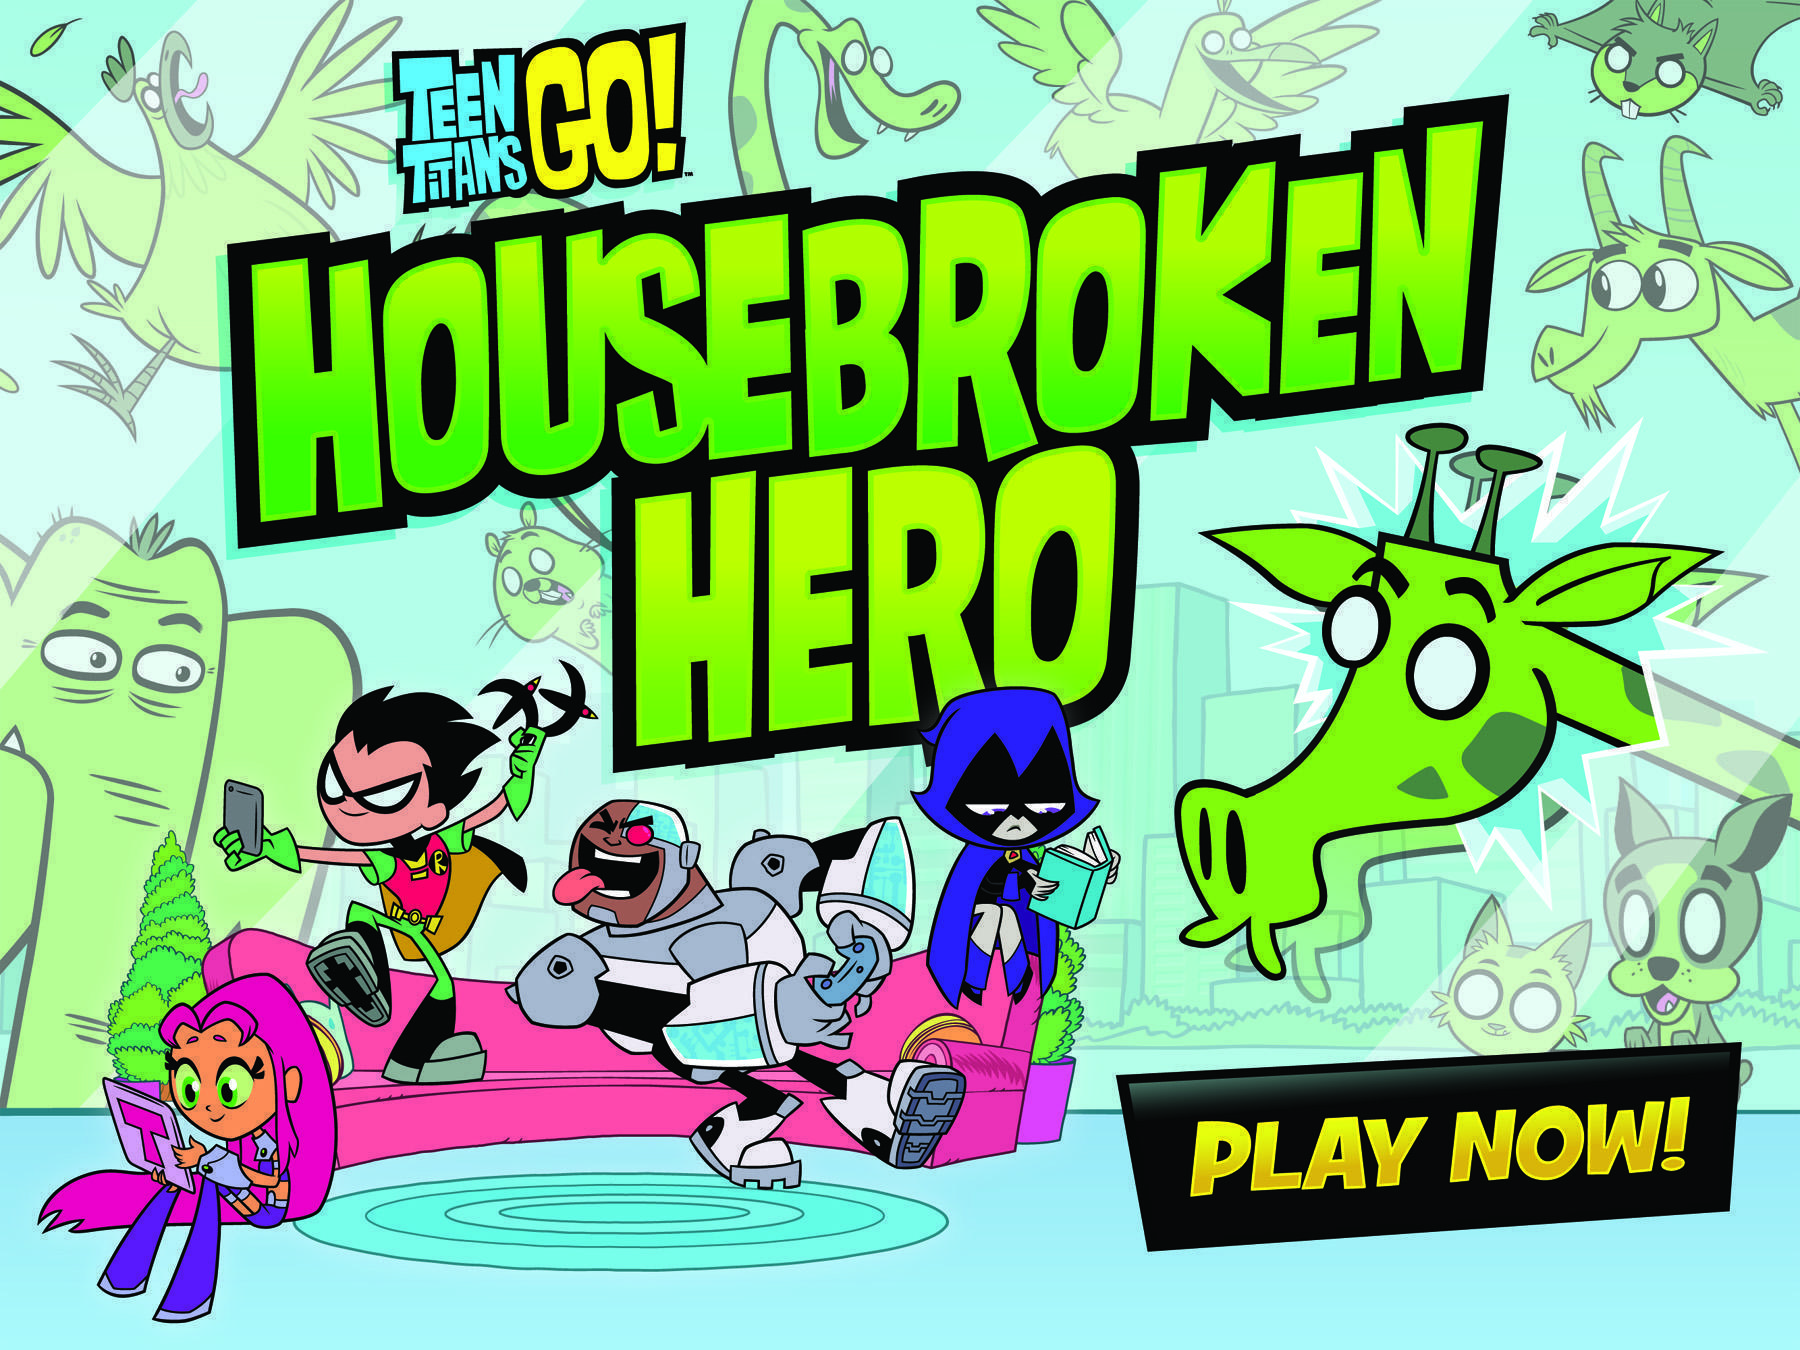 Preview Of "Teen Titans Go!" Game Debuting On Cartoon Network